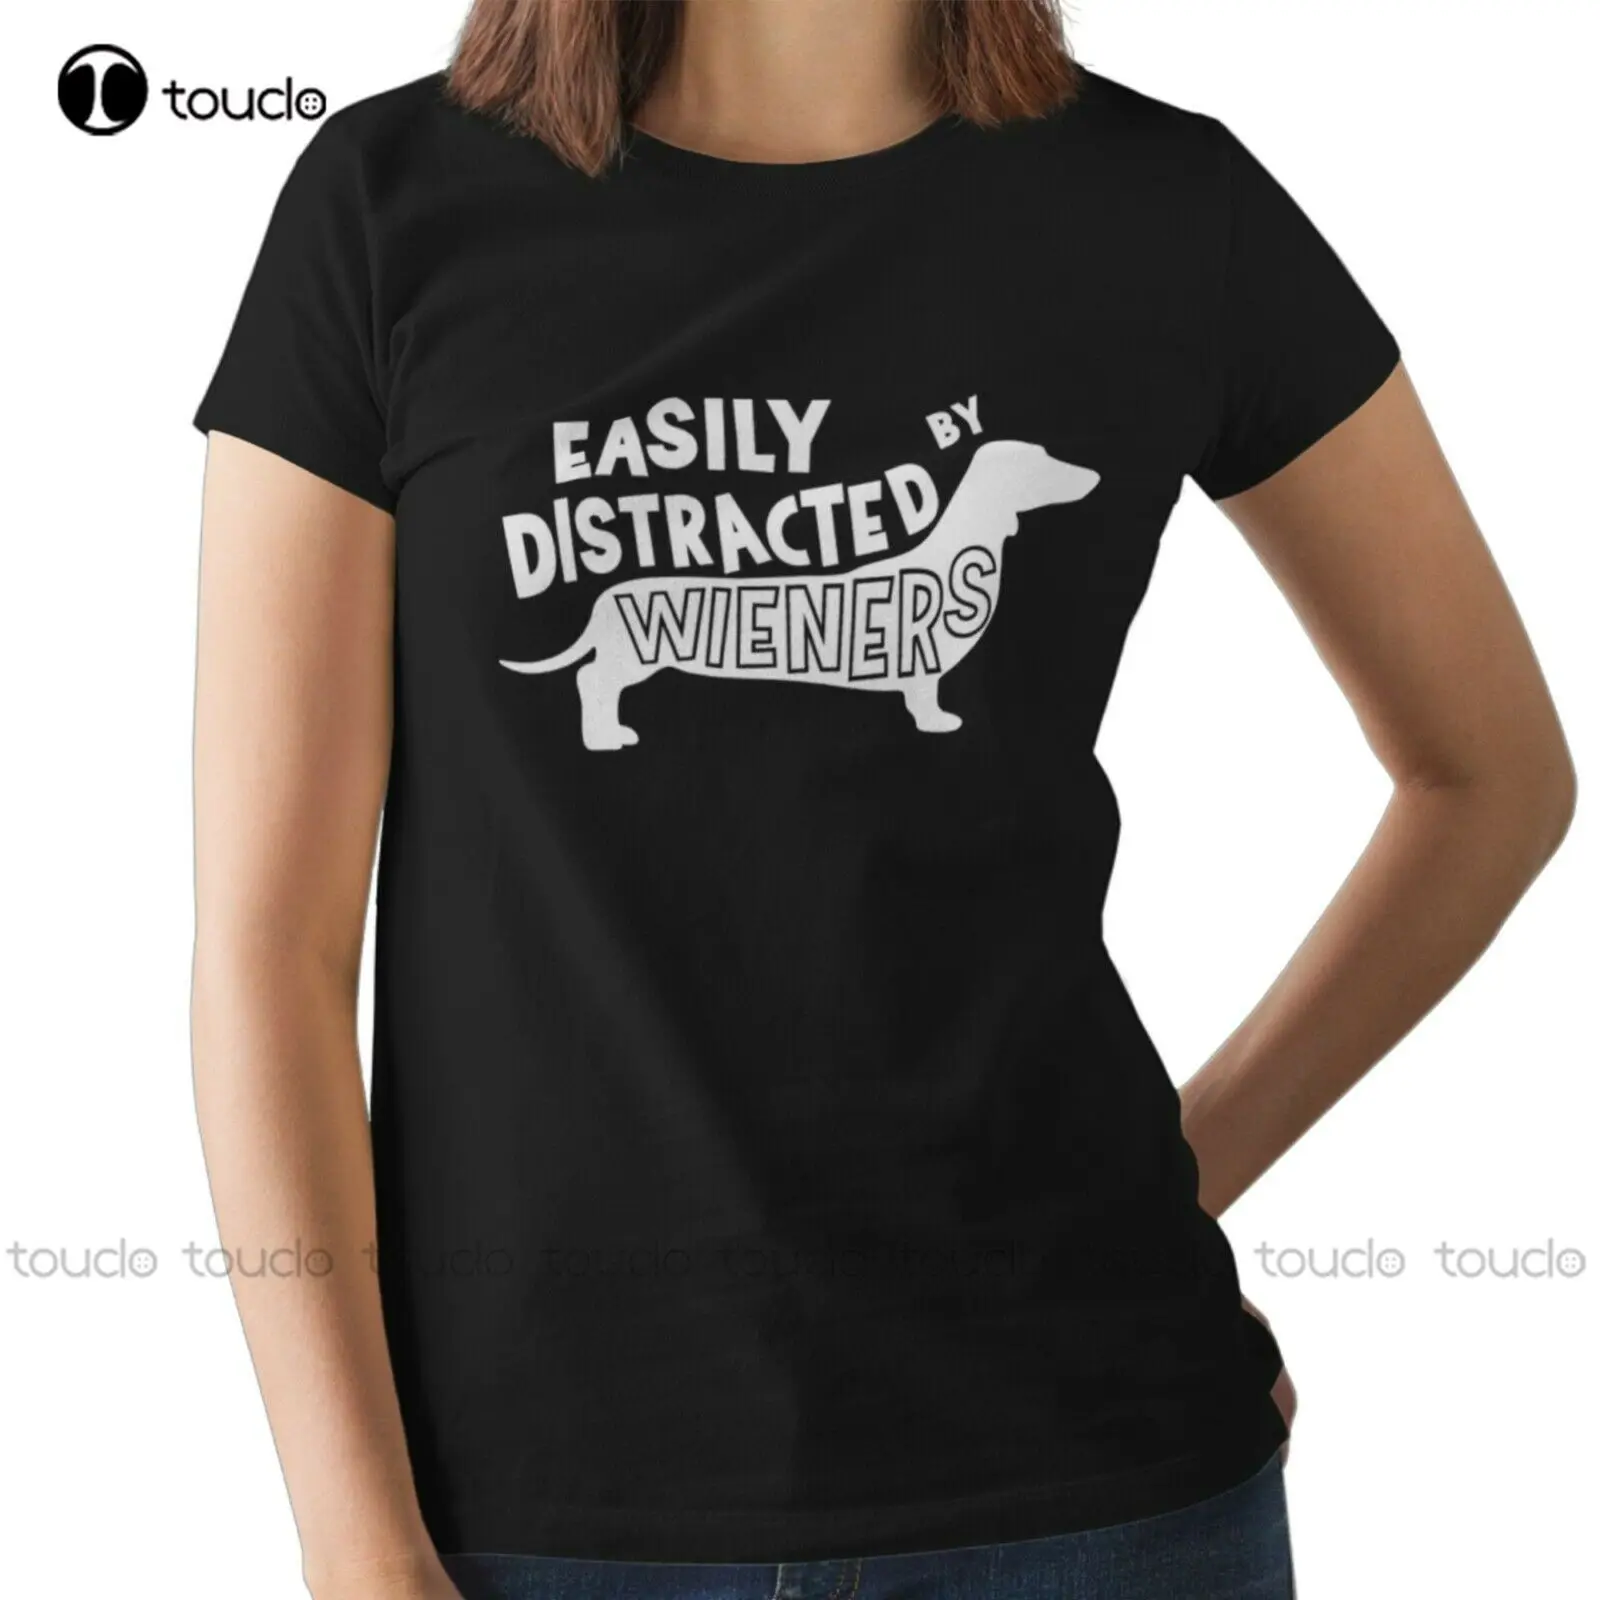 

New Easily Distracted By Wieners Womens T-Shirt Dachshund Weiner Sausage Dog Funny Golf Shirt Cotton Tee S-5Xl Unisex